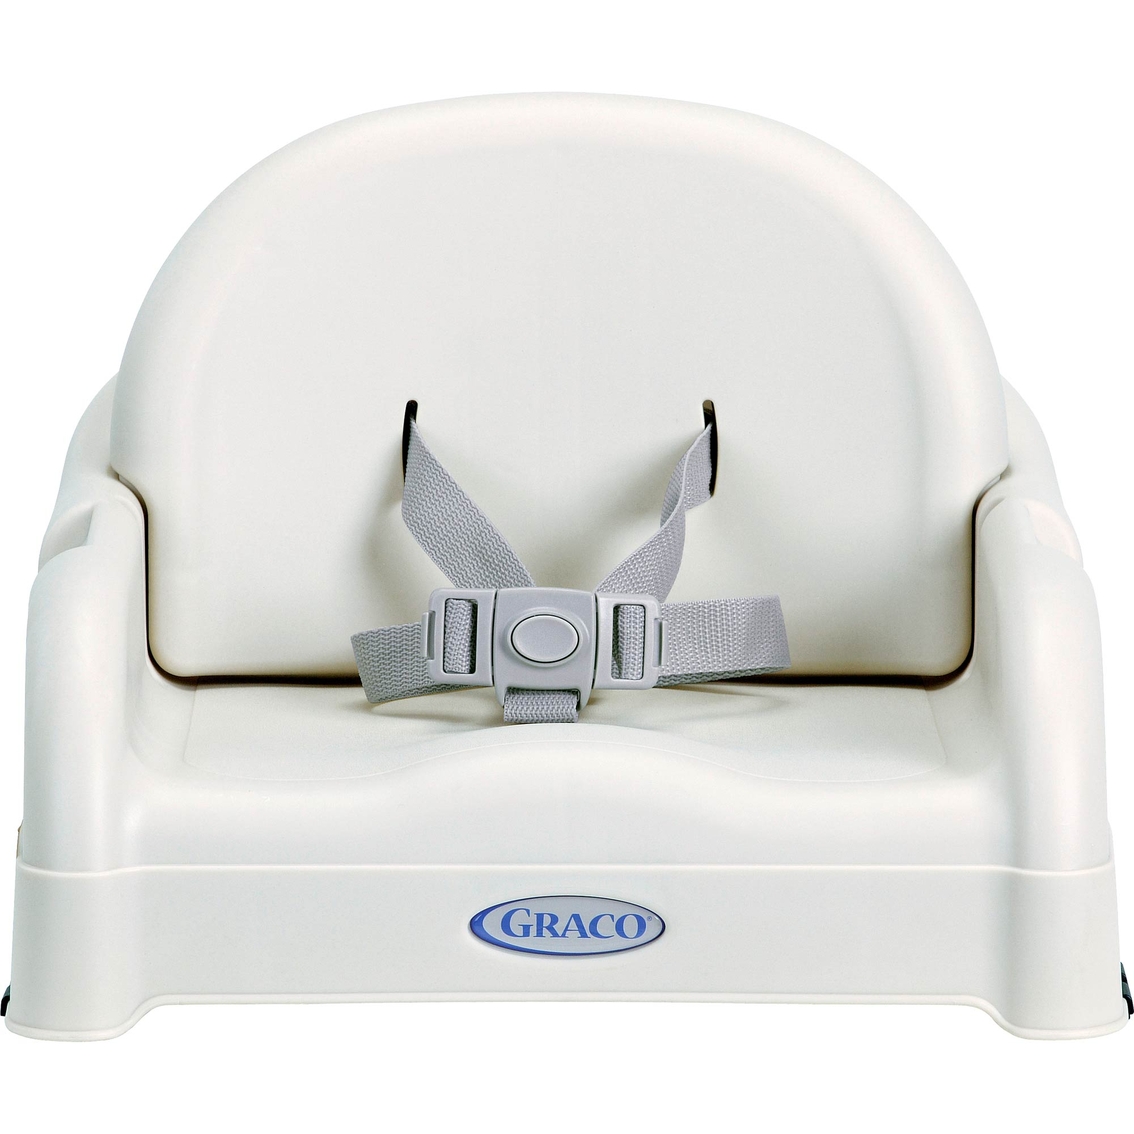 Graco Toddler Booster Seat - Image 2 of 2